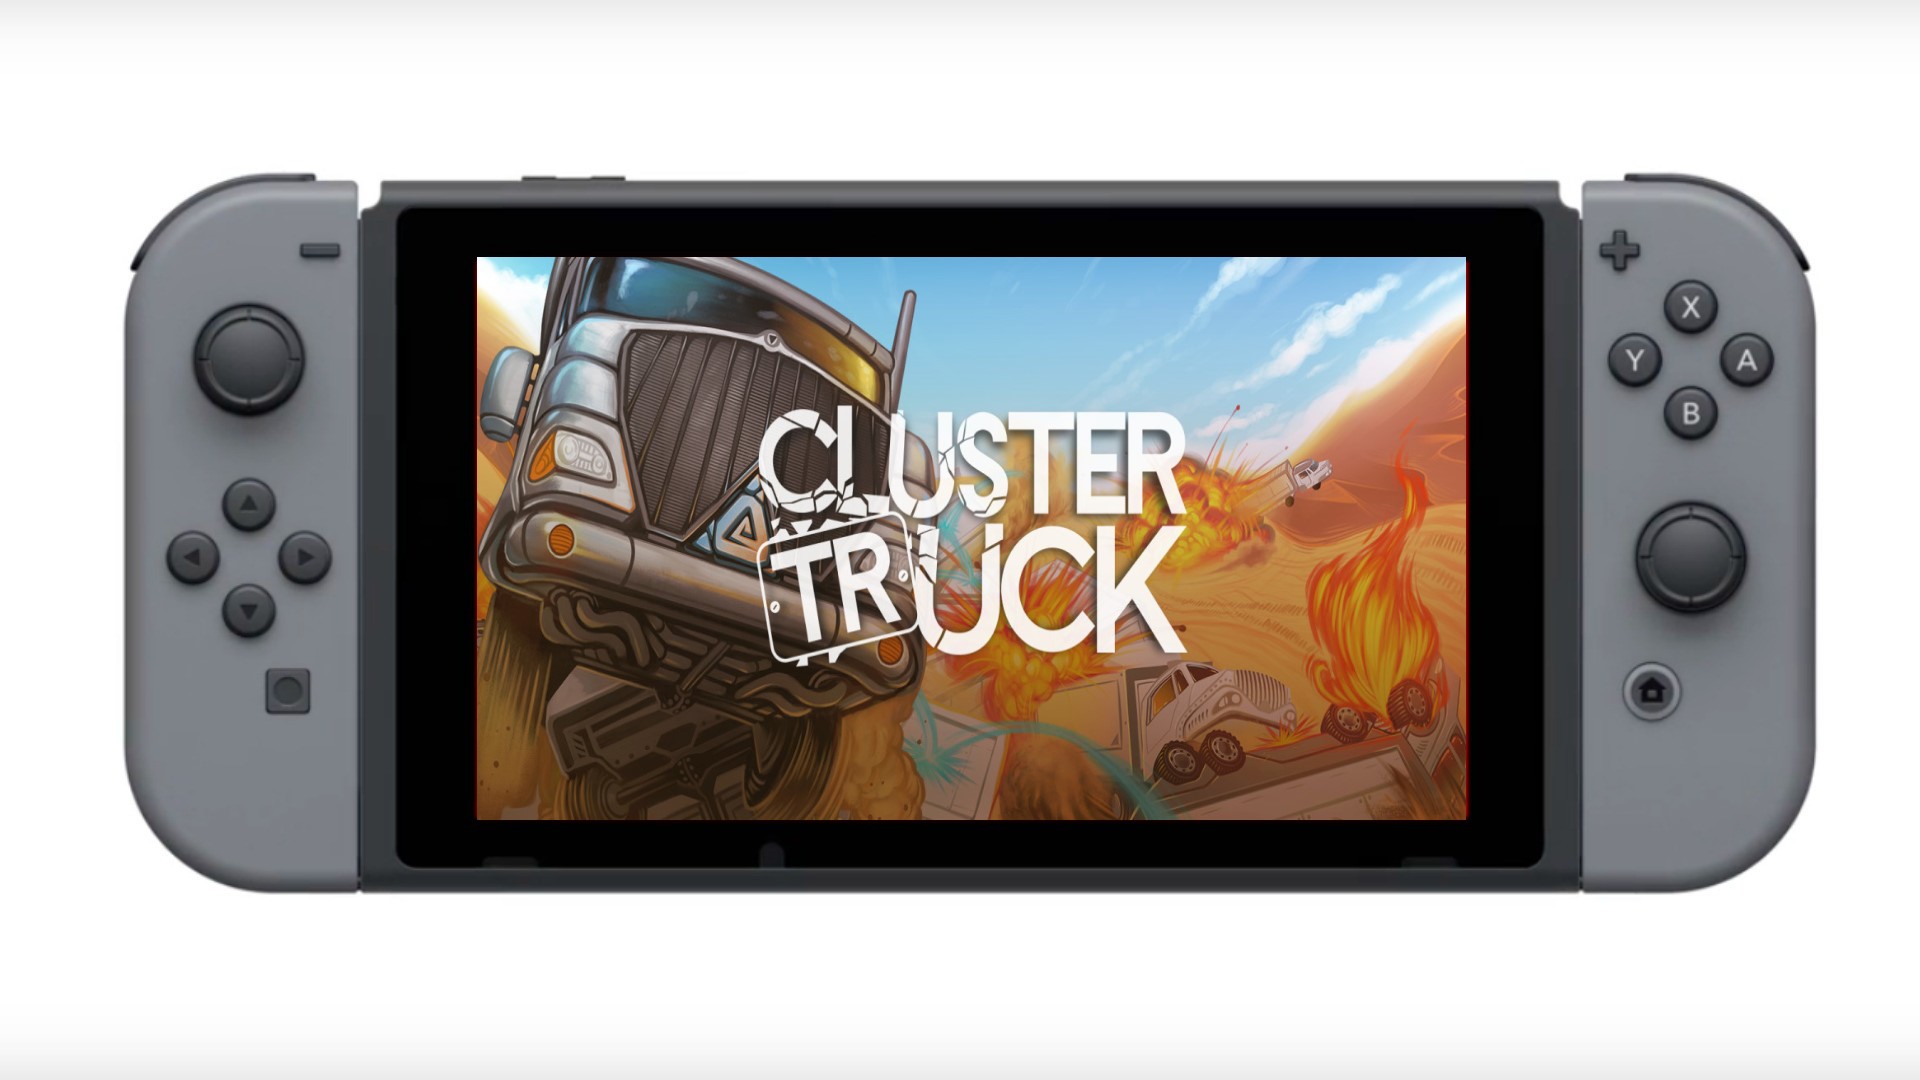 clustertruck game ps4